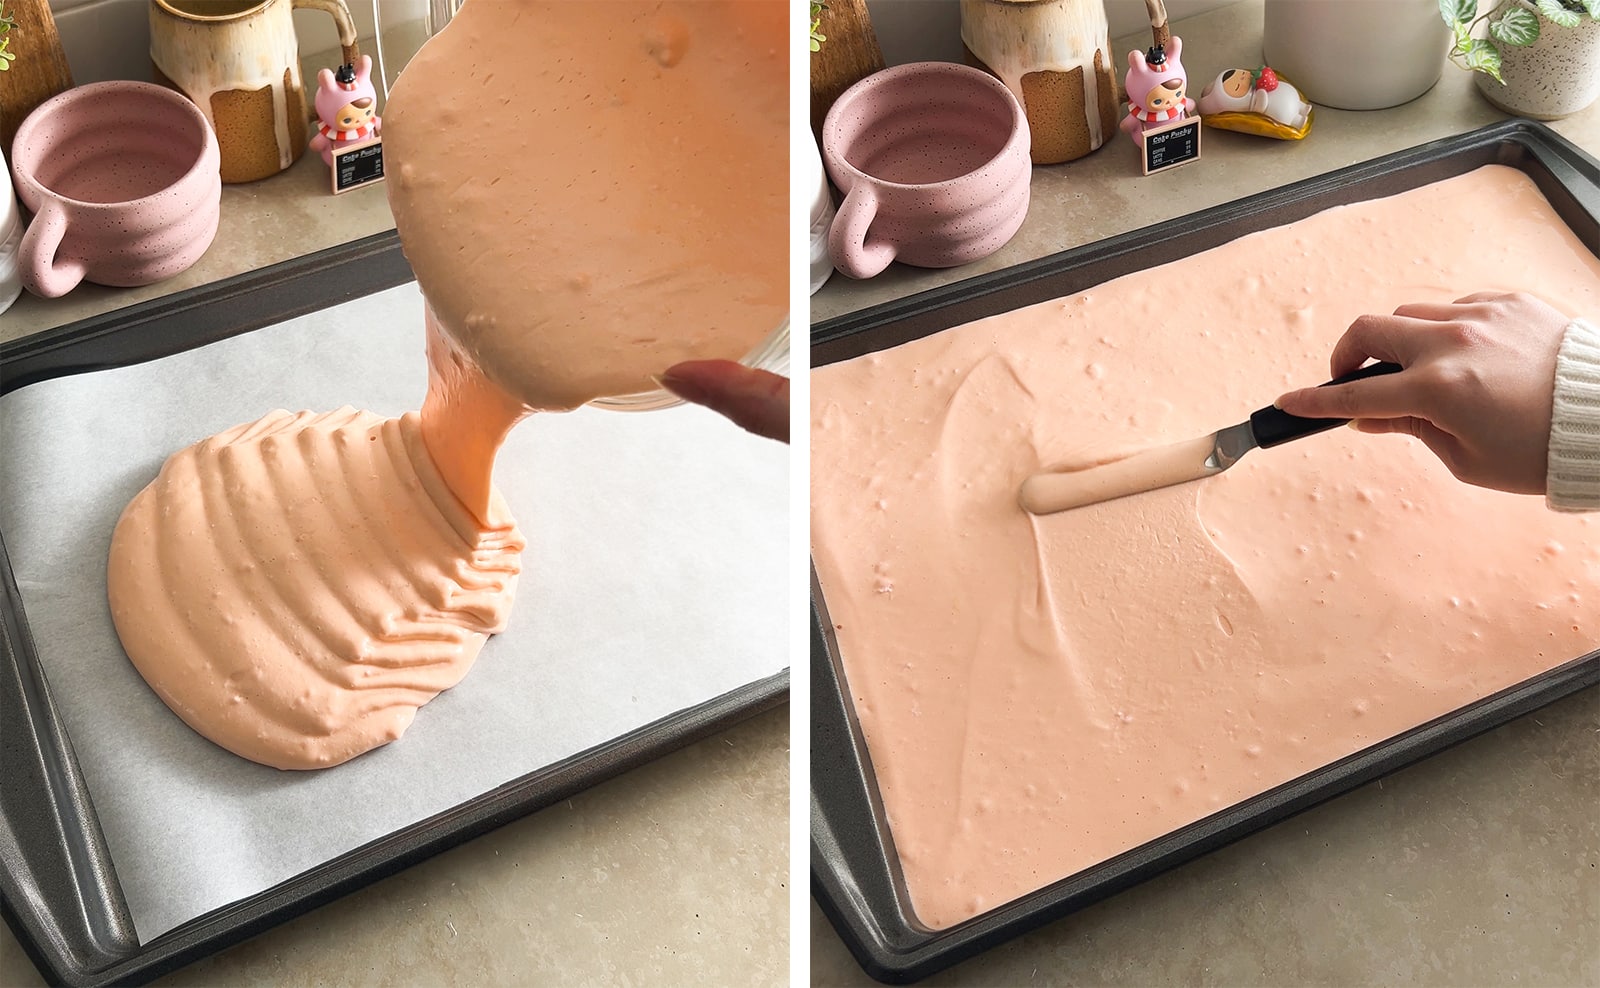 Left to right: pouring chiffon cake batter into a baking tray, smoothing cake batter into a baking tray with an offset spatula.